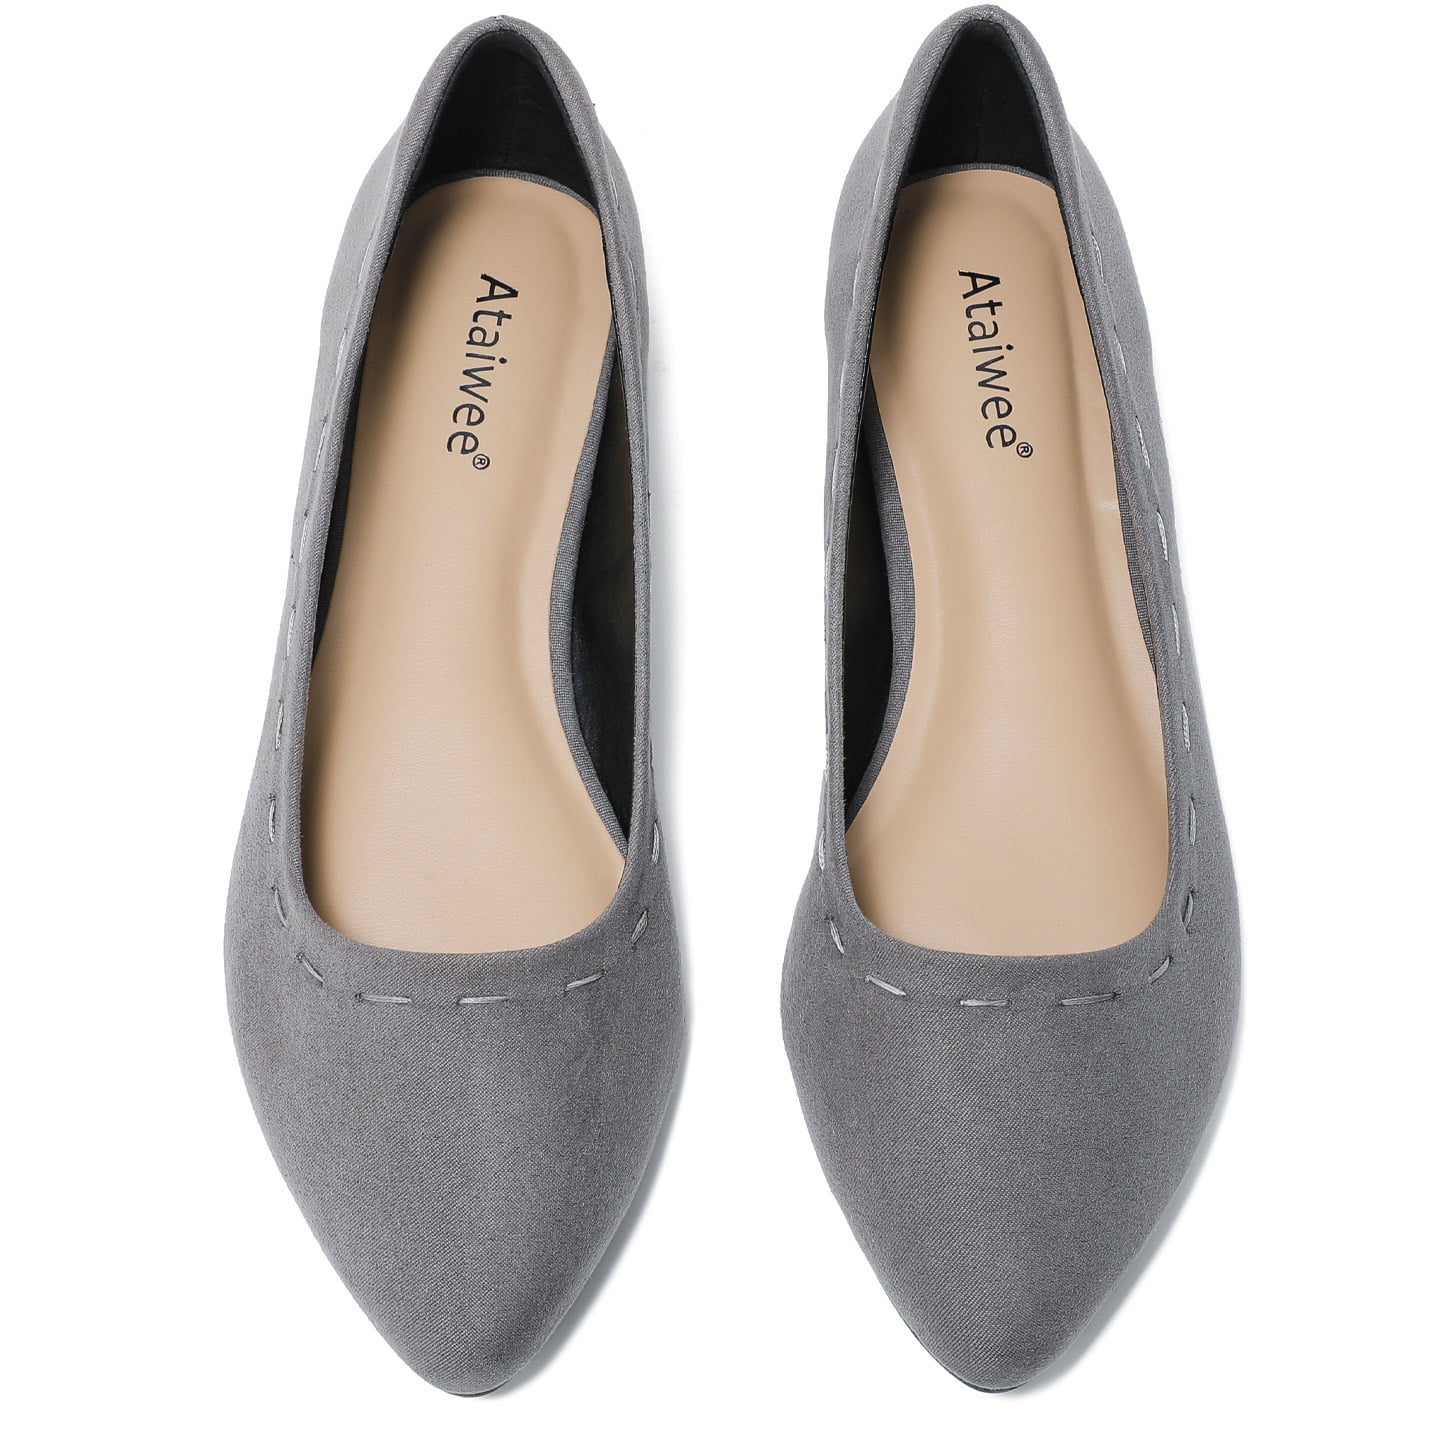 Pointy Toe Suede Cozy Anti-Skid Cute Slip-on Ballet Flats. Ataiwee Womens Wide Width Flat Shoes 